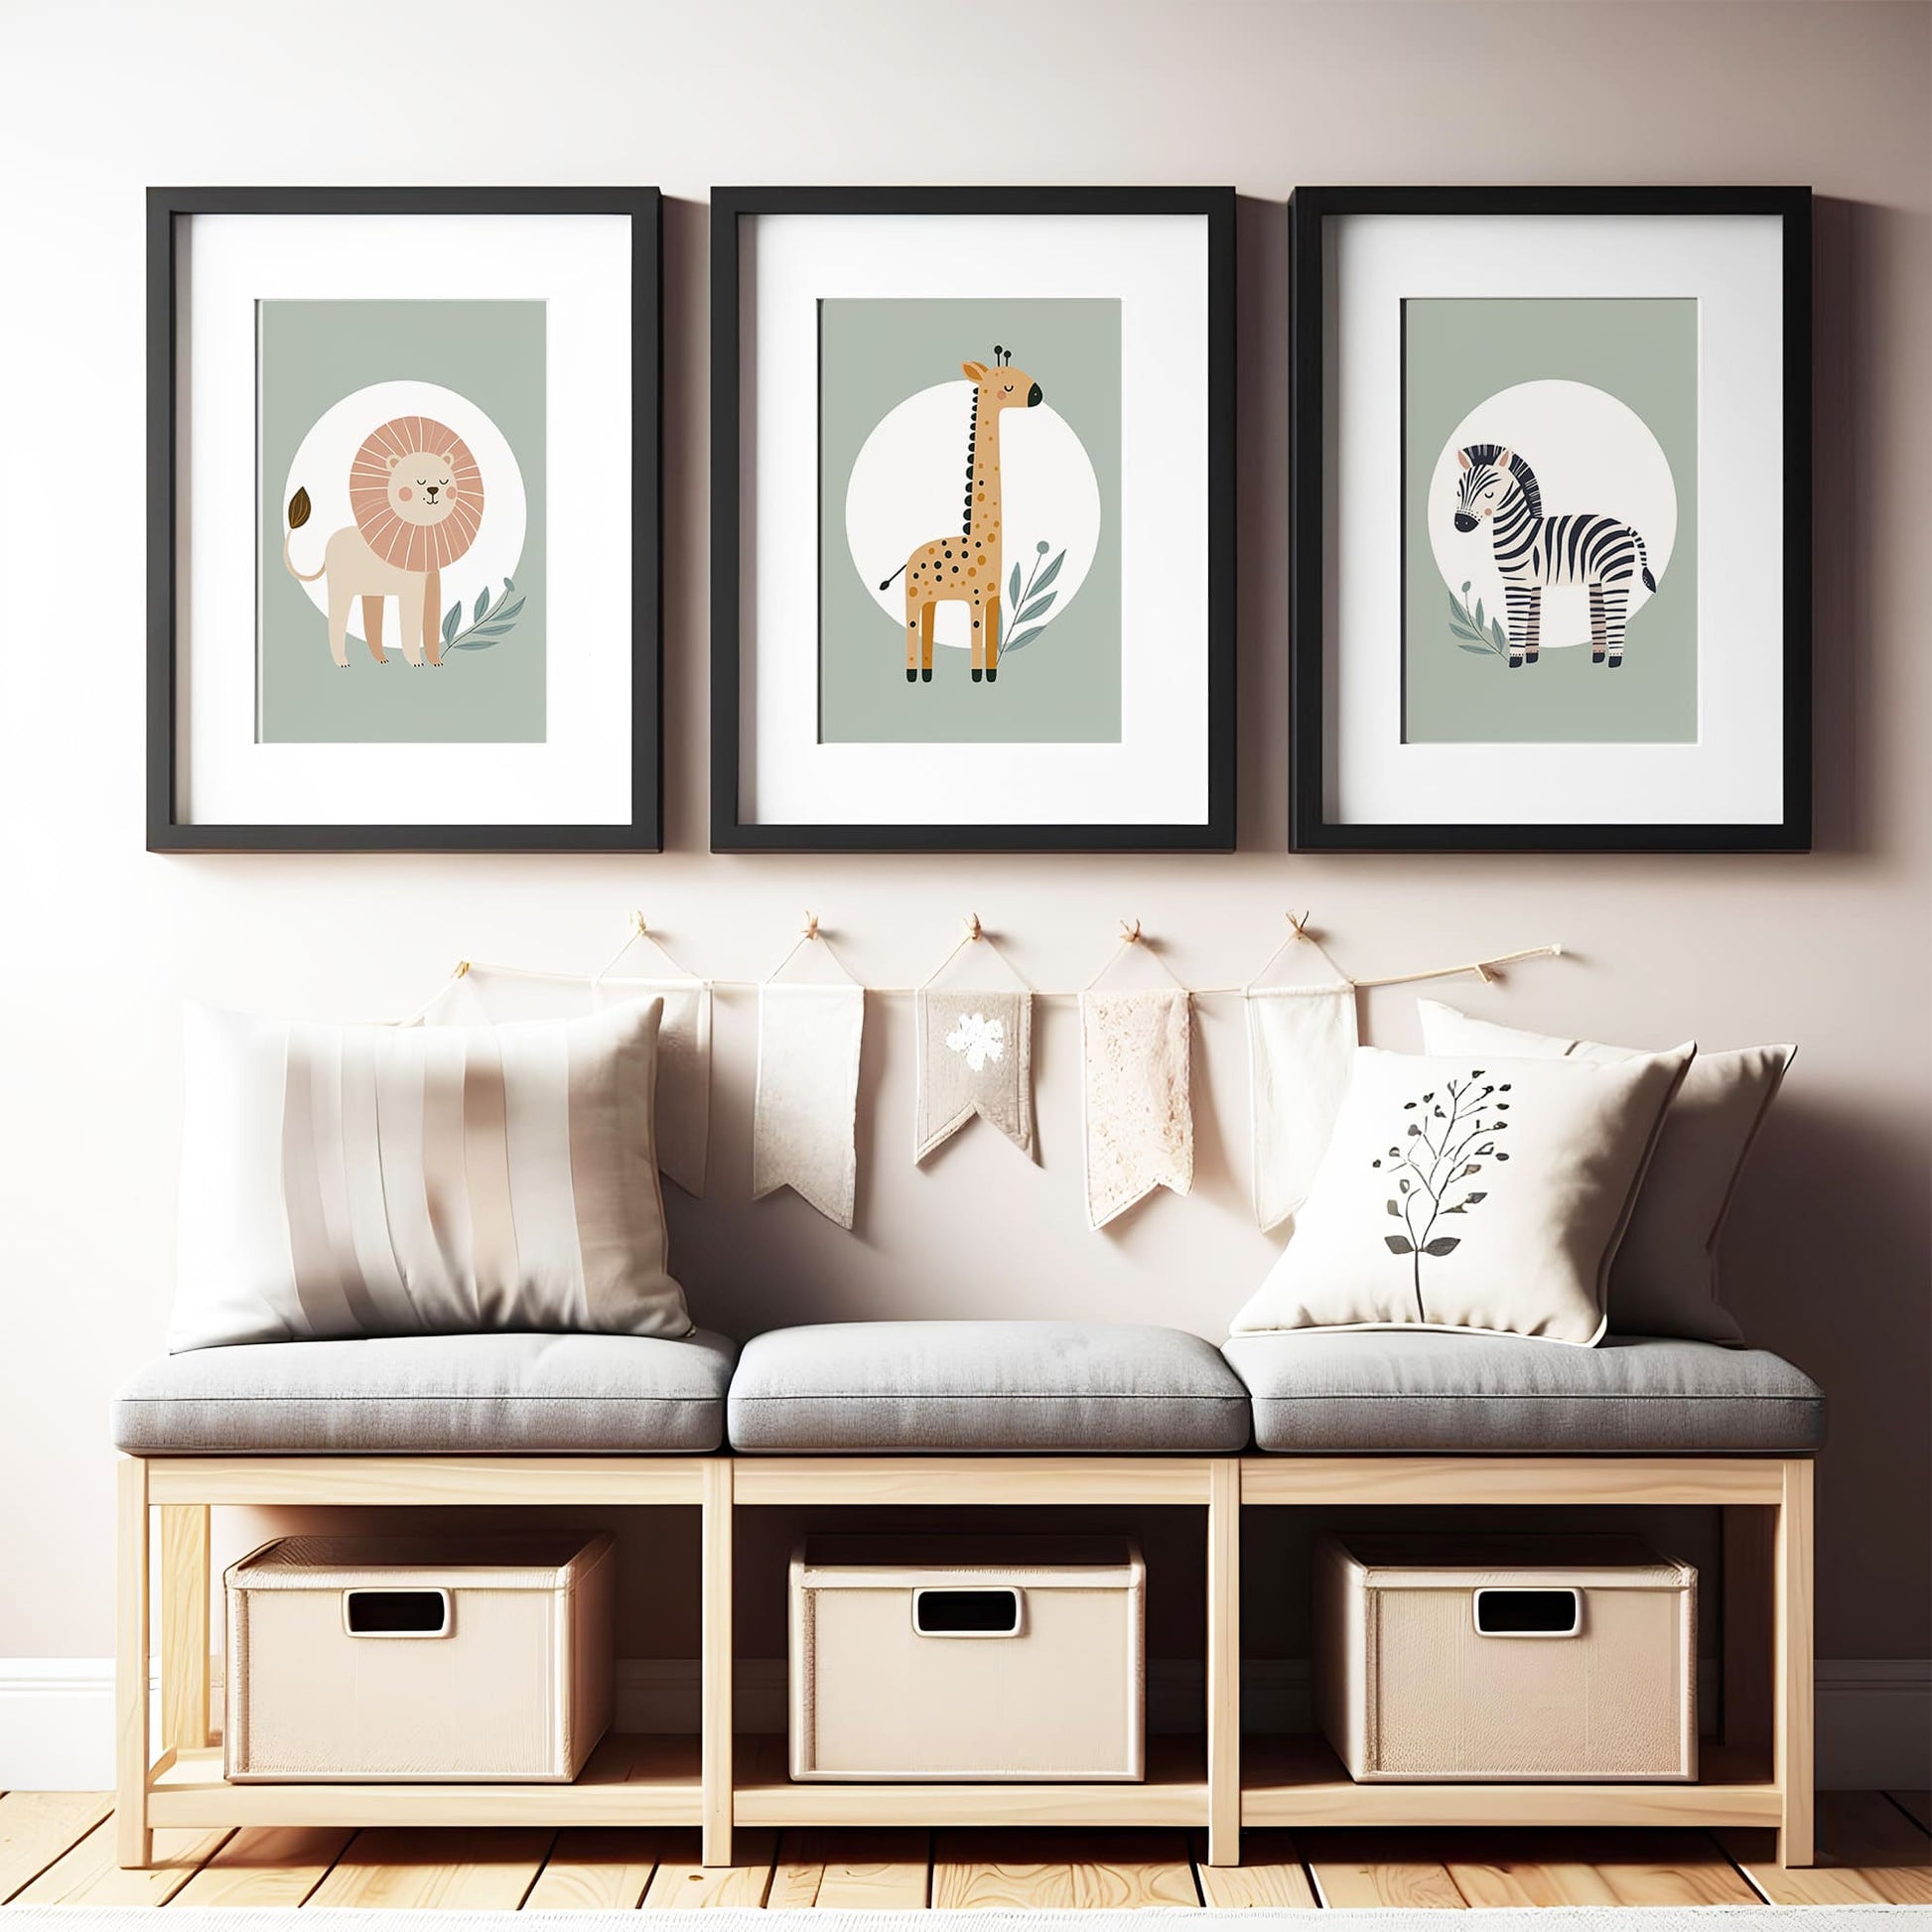 Set of three A4 prints featuring minimalist illustrations in muted tones. Each print depicts a different animal: a lion, a zebra, and a giraffe. The background is sage green with a white circle on which the animal is overlaid.